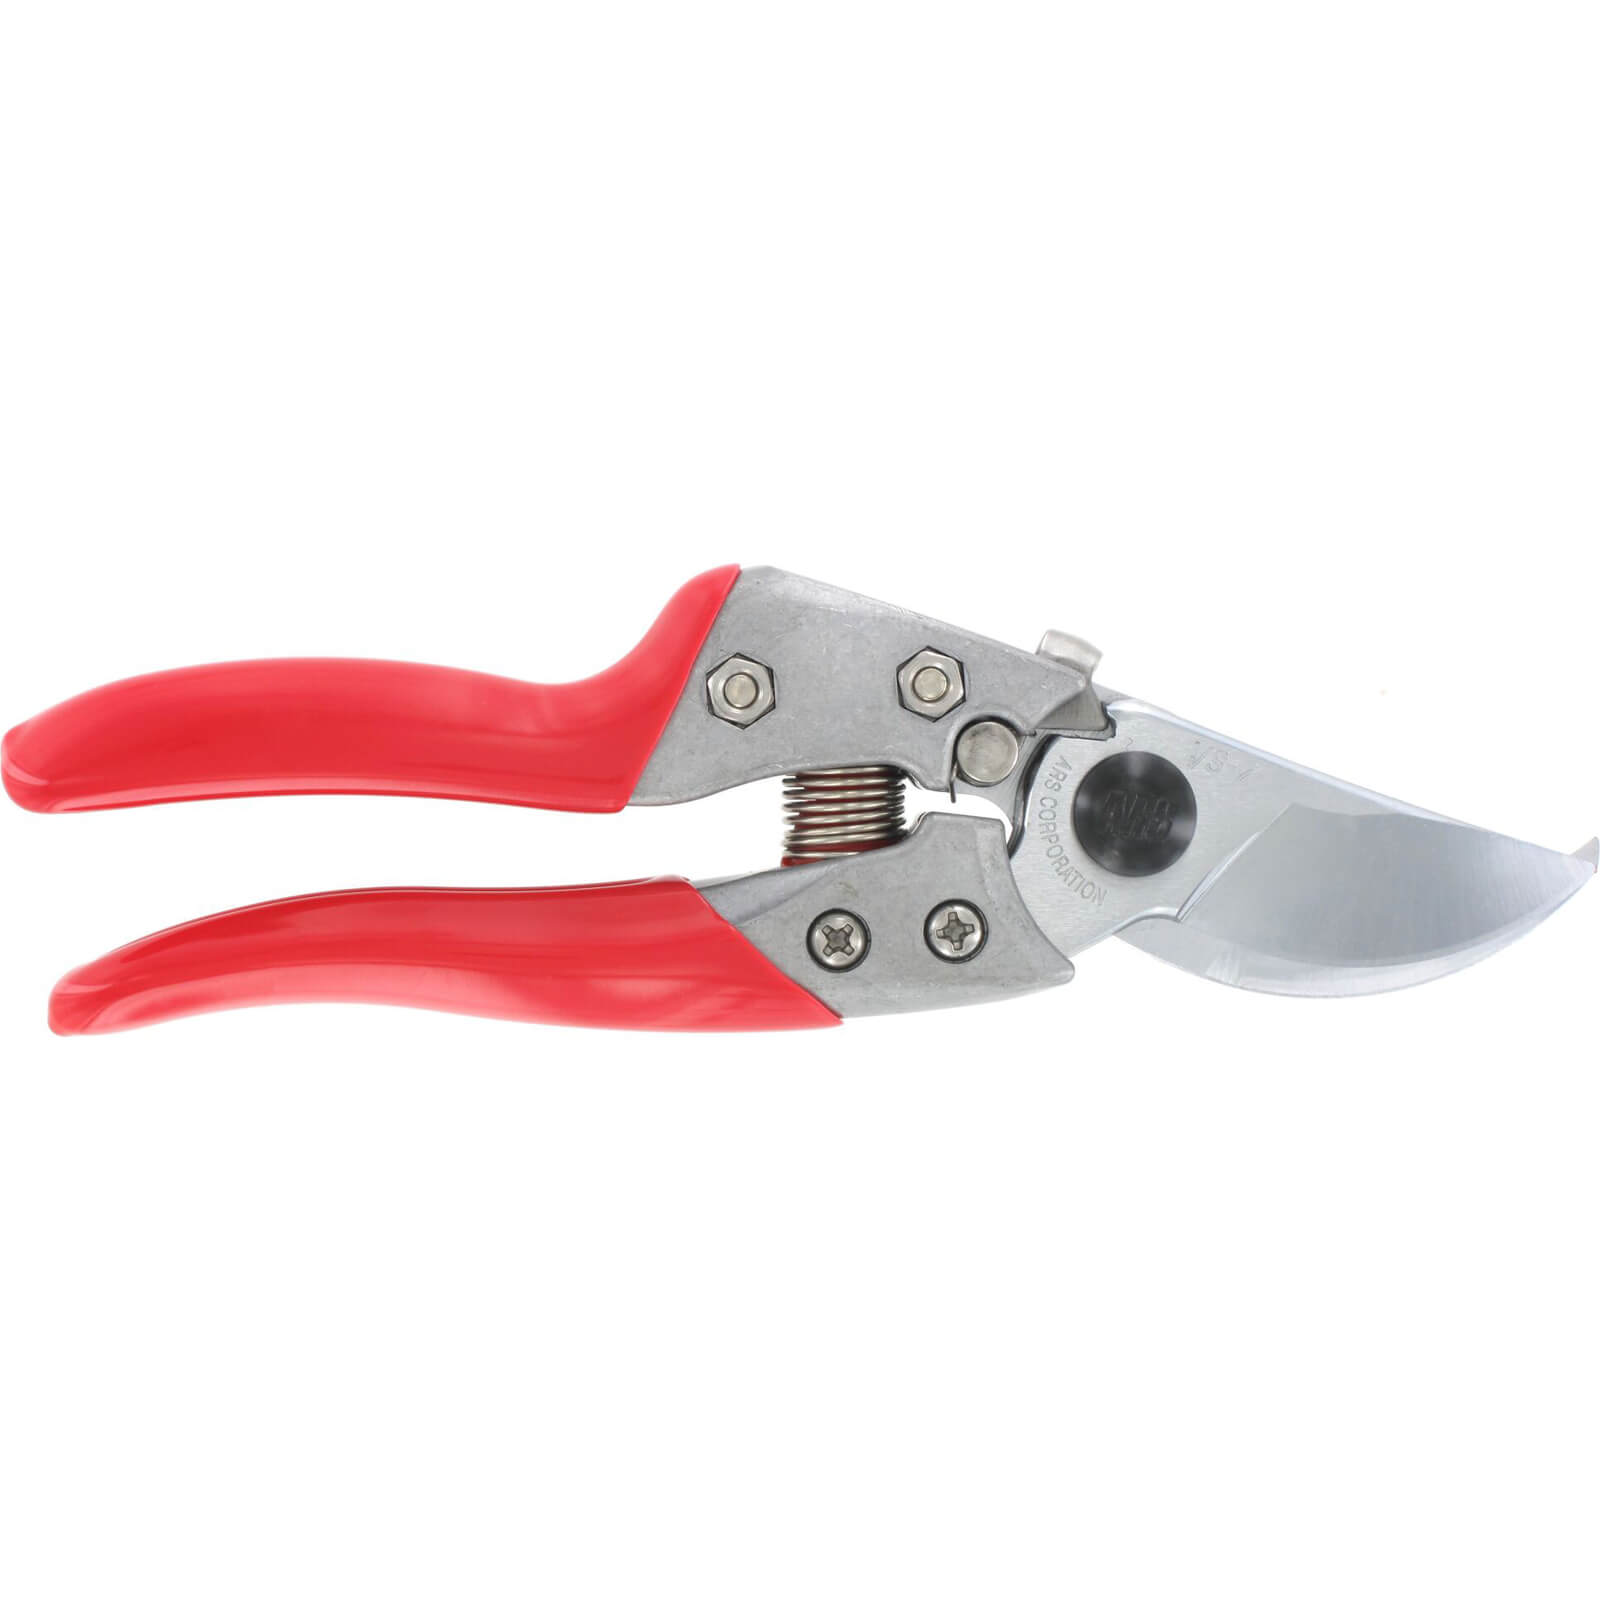 Image of ARS VS-XZ Single Hand Locking Bypass Secateurs 180mm